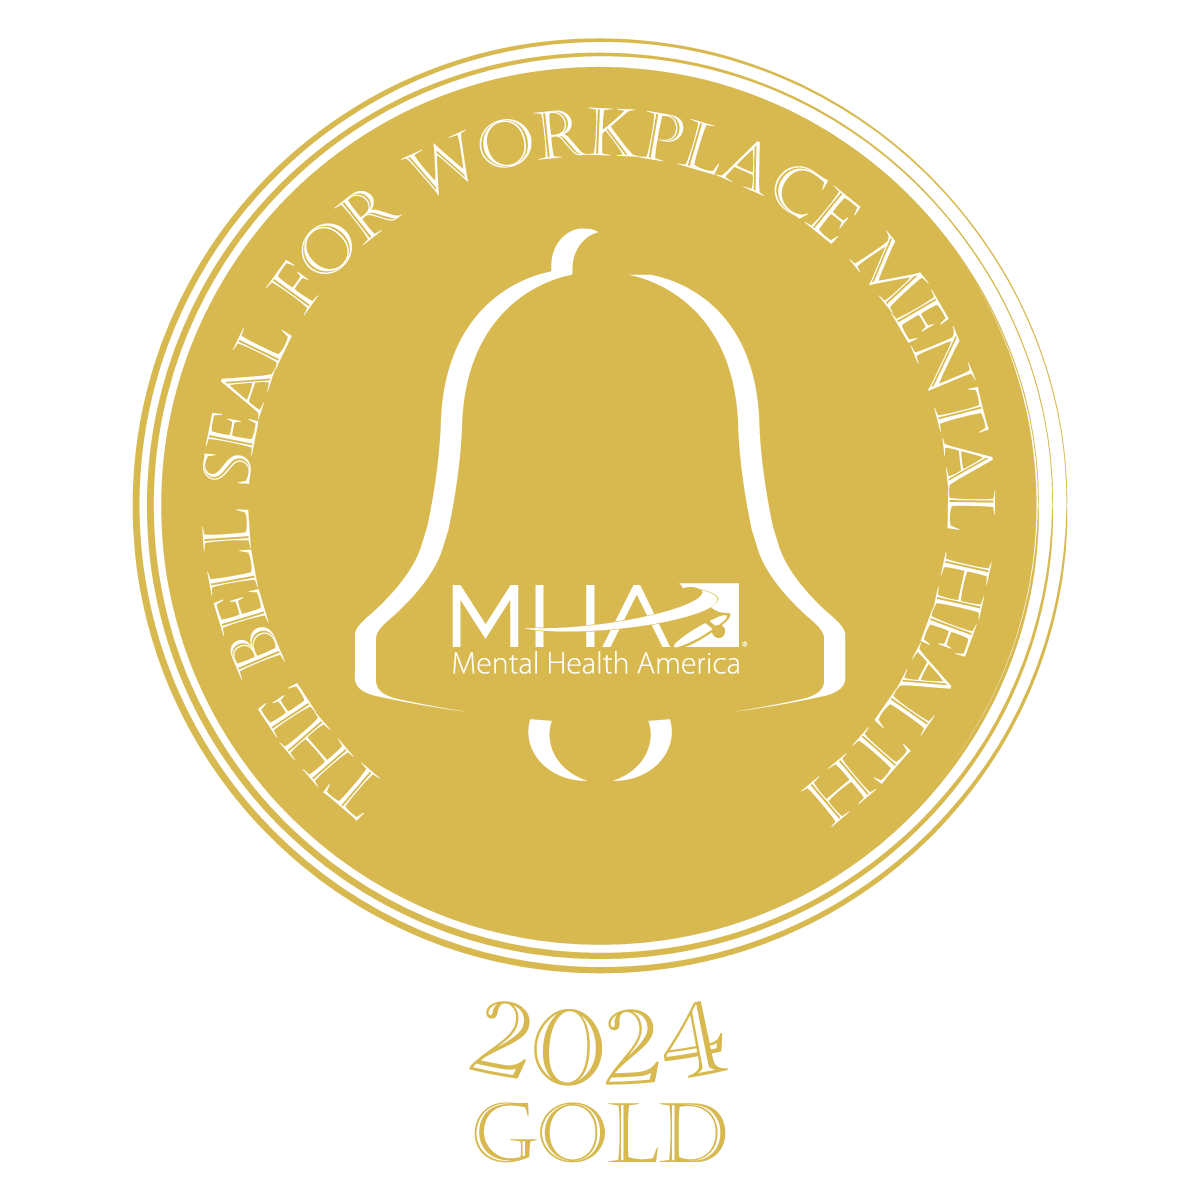 The Bell Seal For Workplace Mental Health, Mental Health America, 2024 Gold (logo)